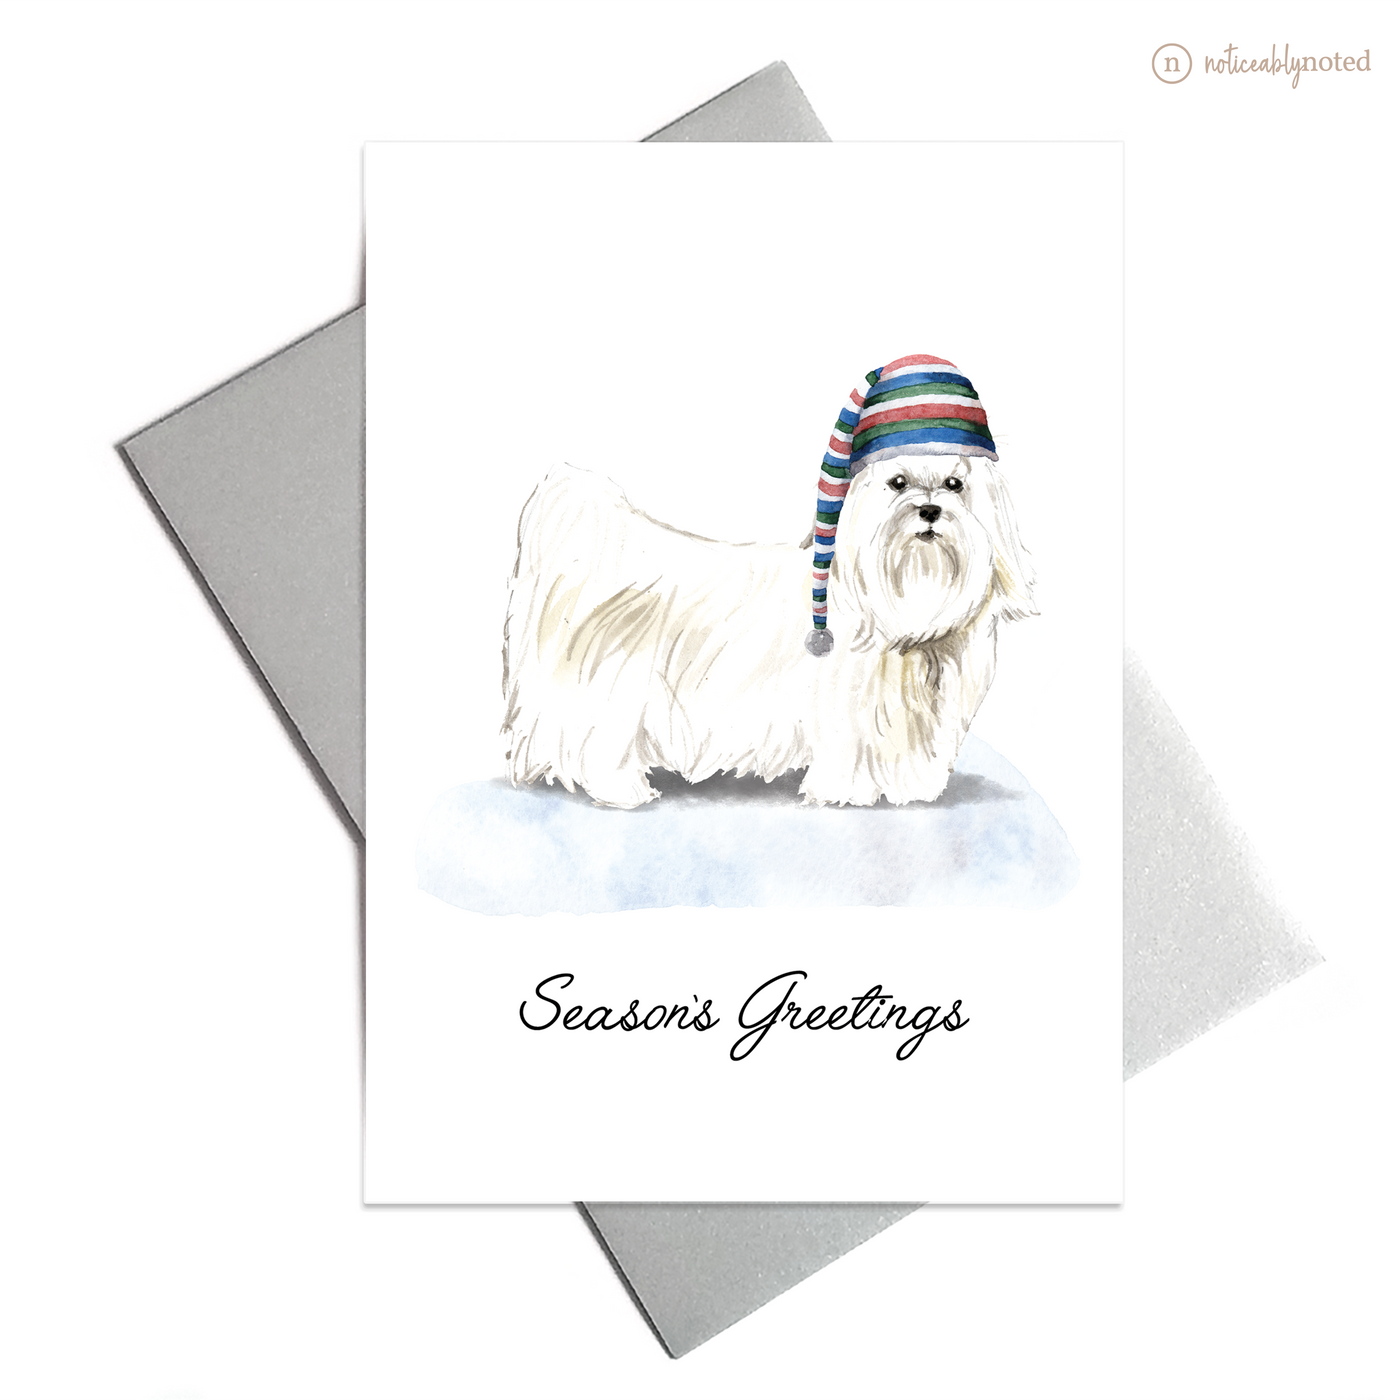 Maltese Dog Holiday Card | Noticeably Noted